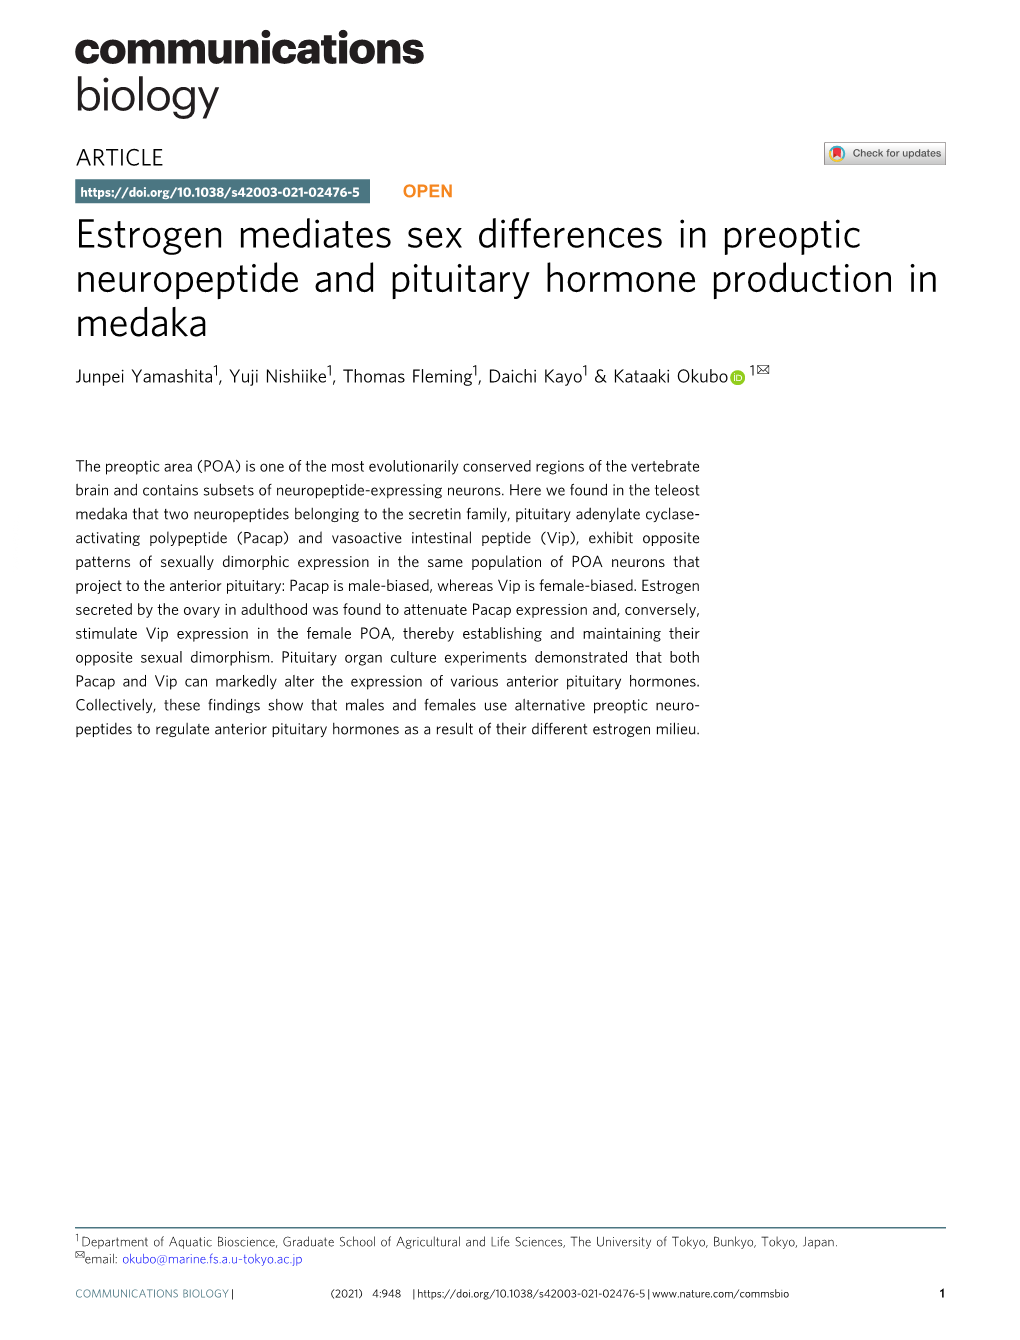 Estrogen Mediates Sex Differences in Preoptic Neuropeptide and Pituitary